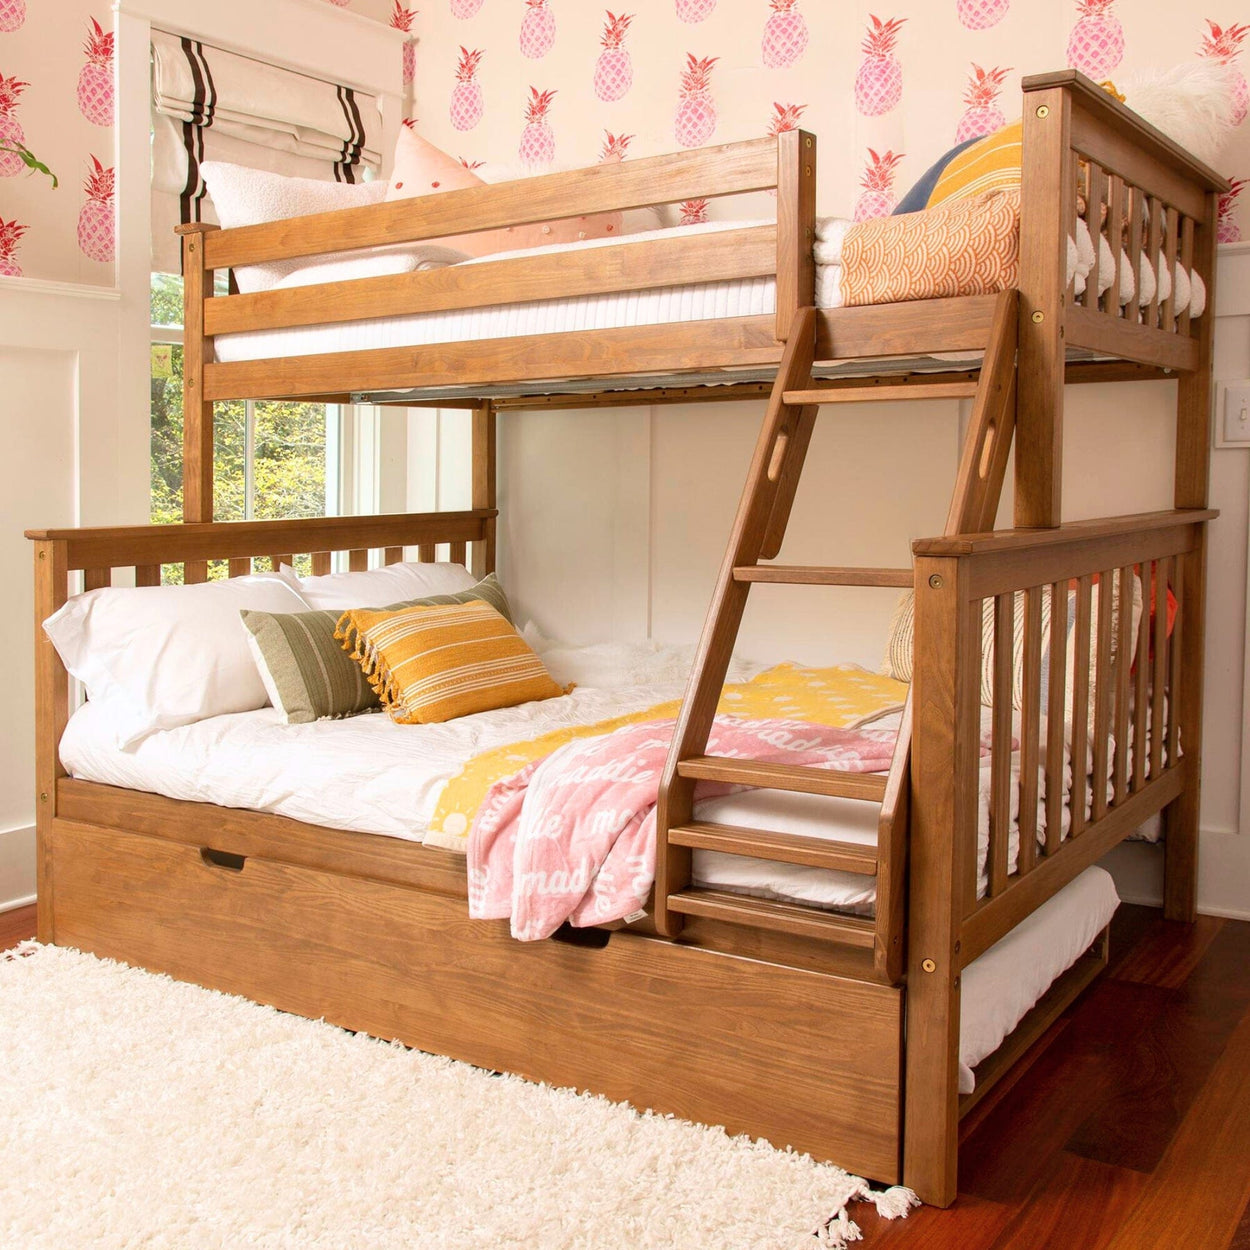 186231-007 : Bunk Beds Classic Twin over Full Bunk Bed with Trundle, Pecan